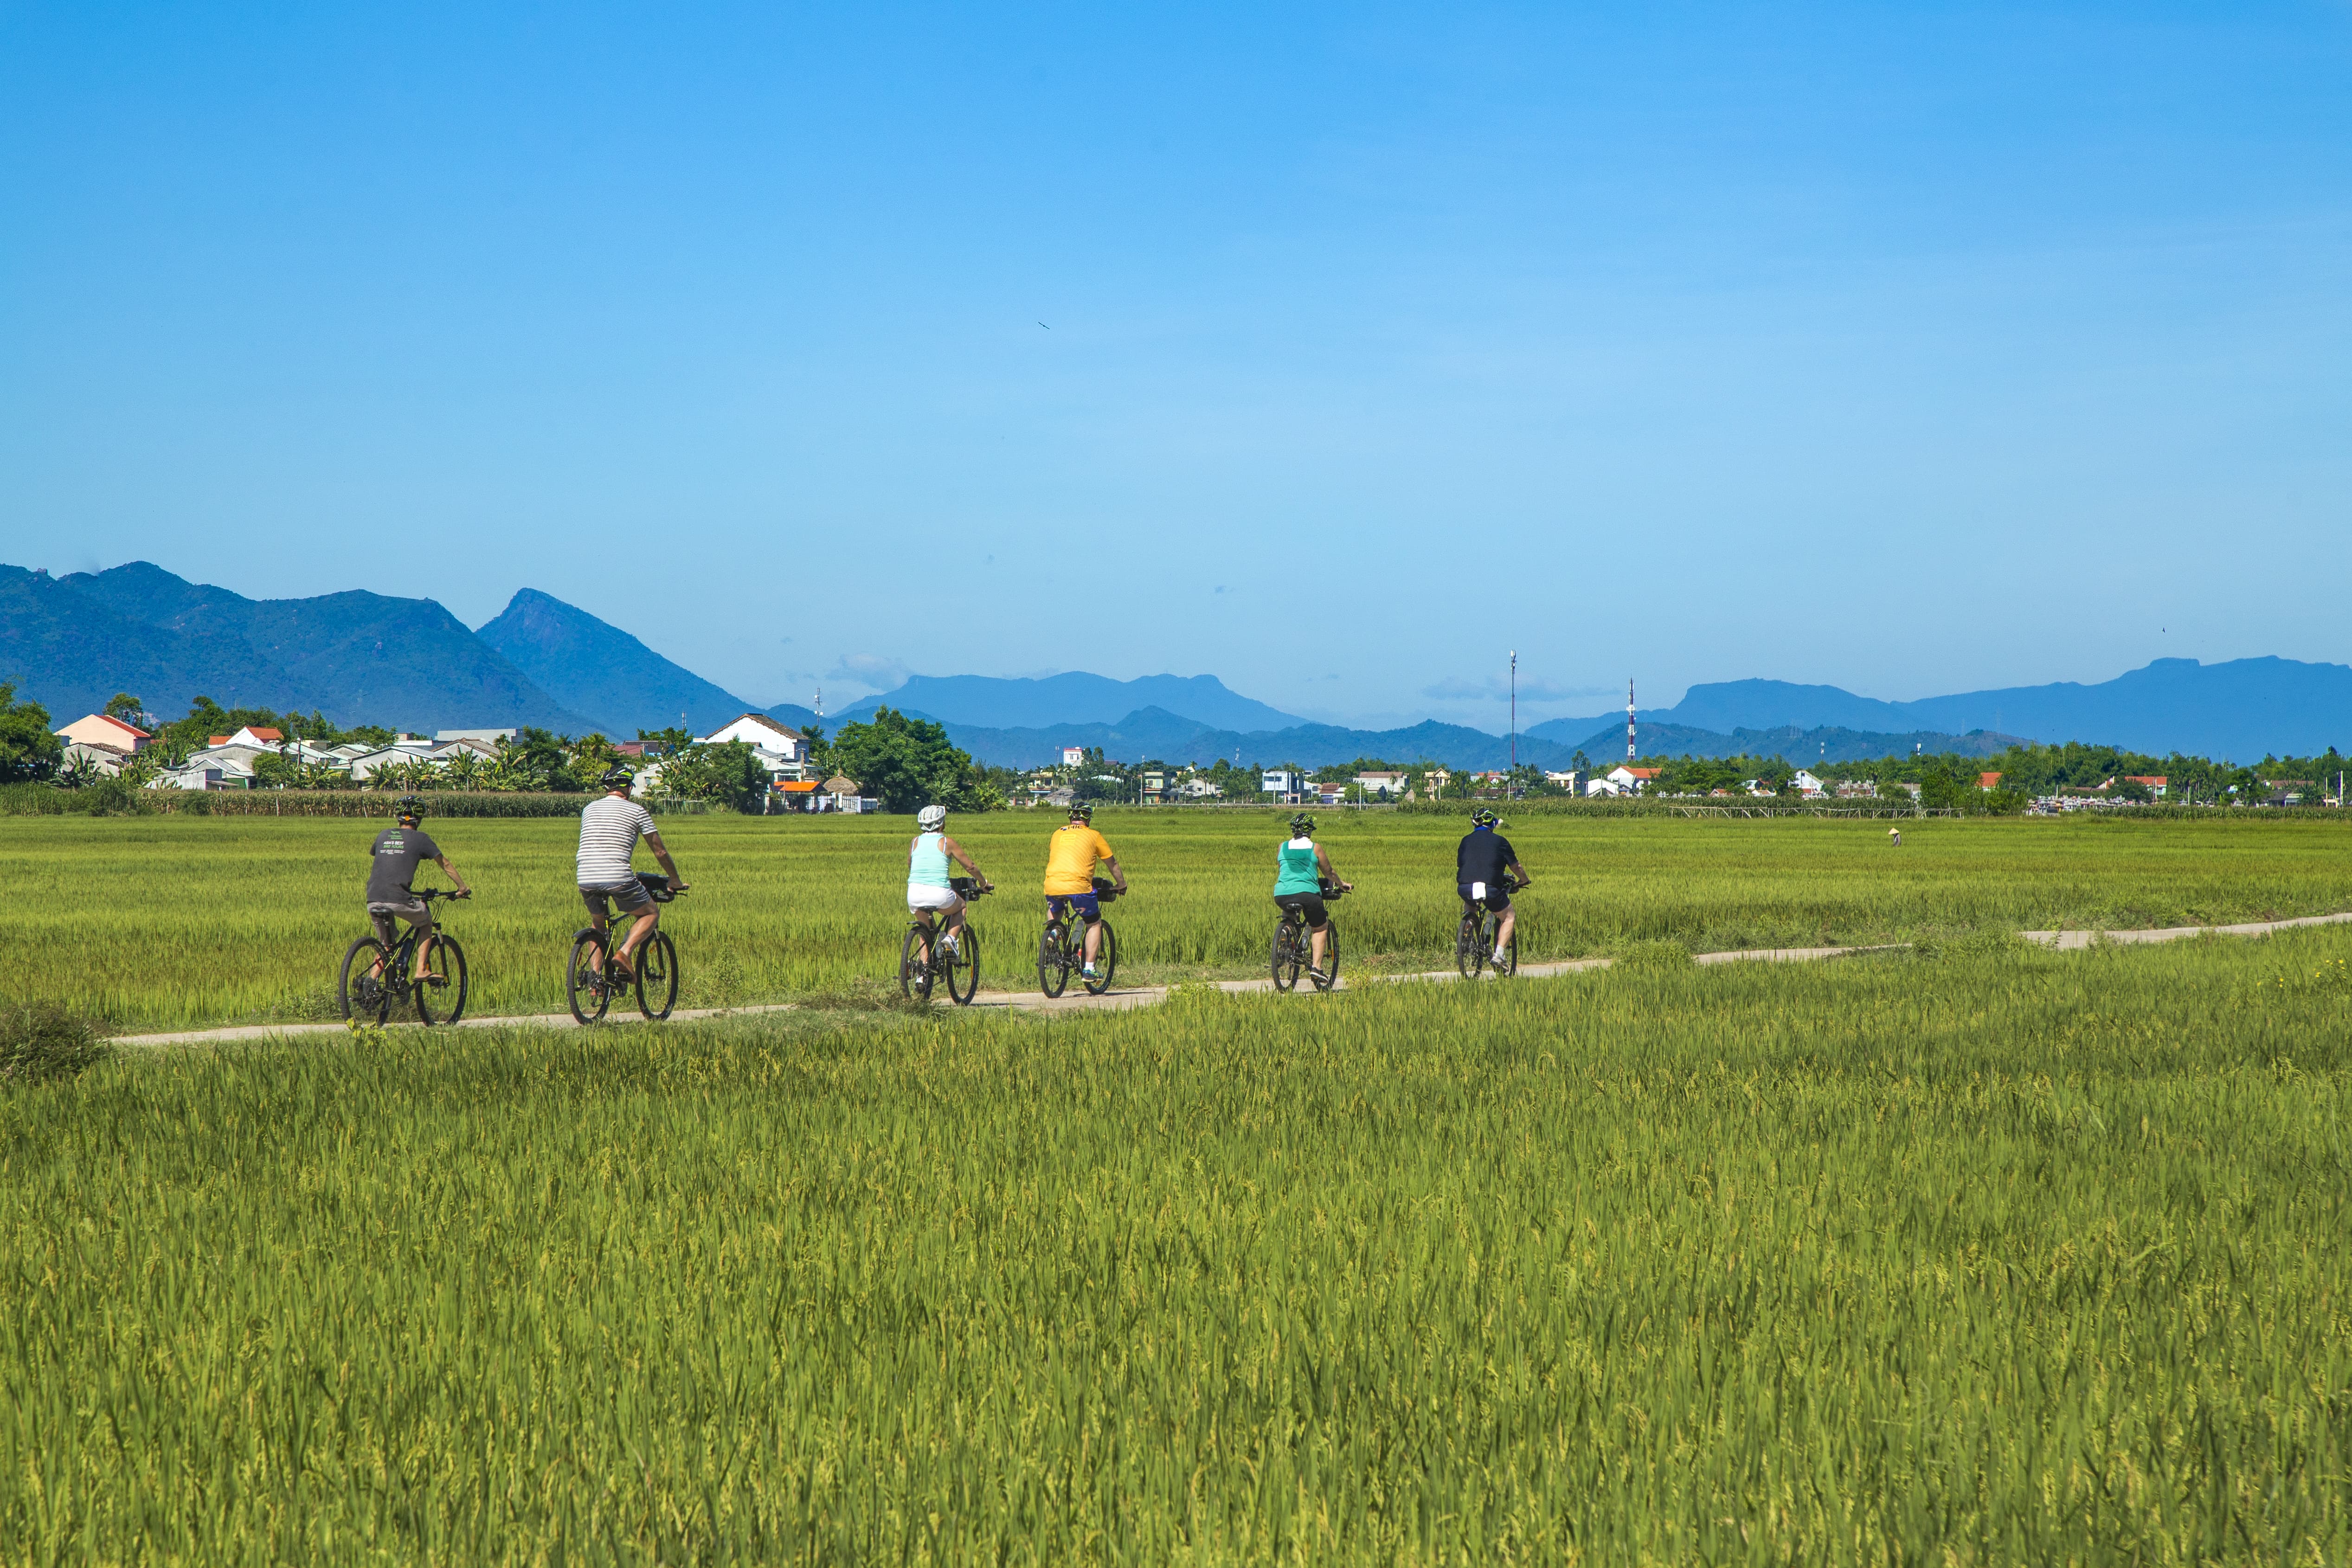 Hoi An My Son Holy Land Cycling Tour